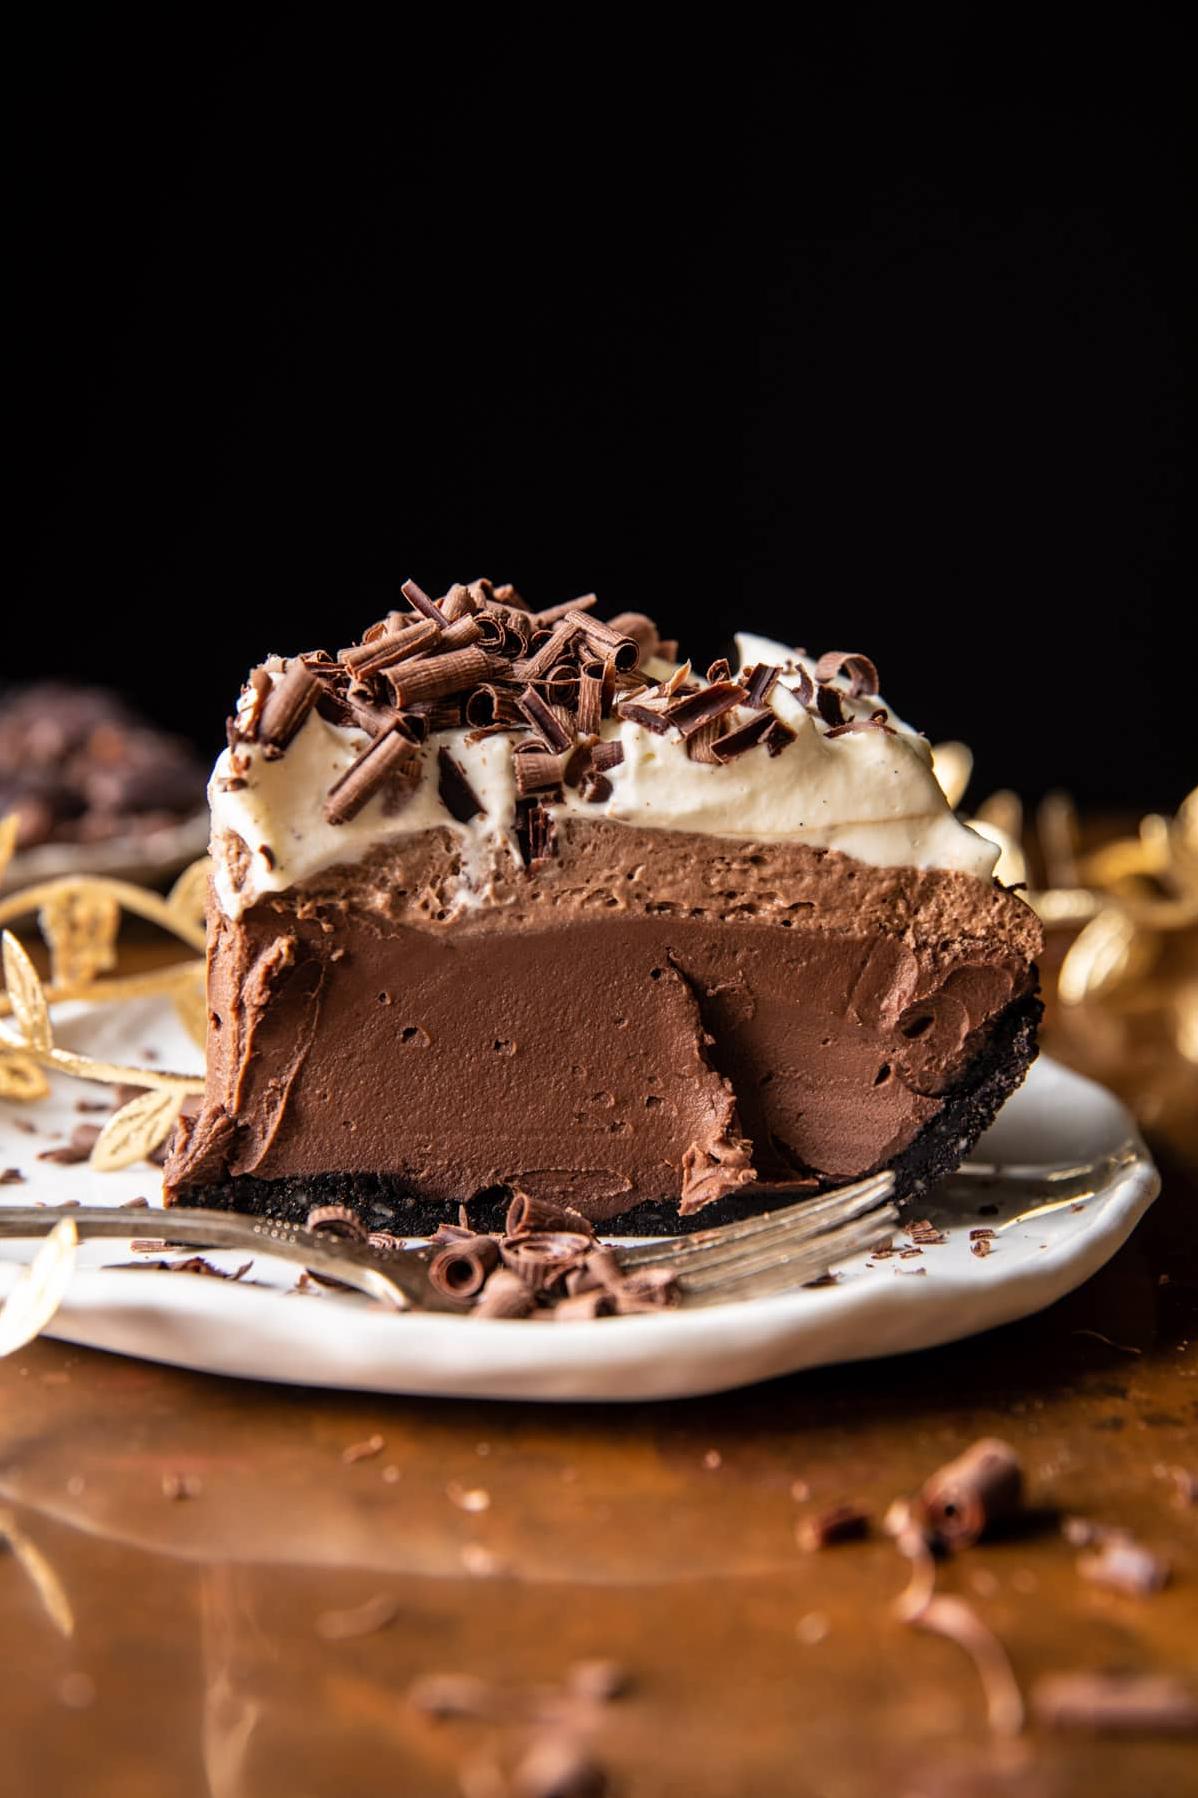  Give your taste buds a sweet and satisfying treat with this indulgent coffee mousse pie.